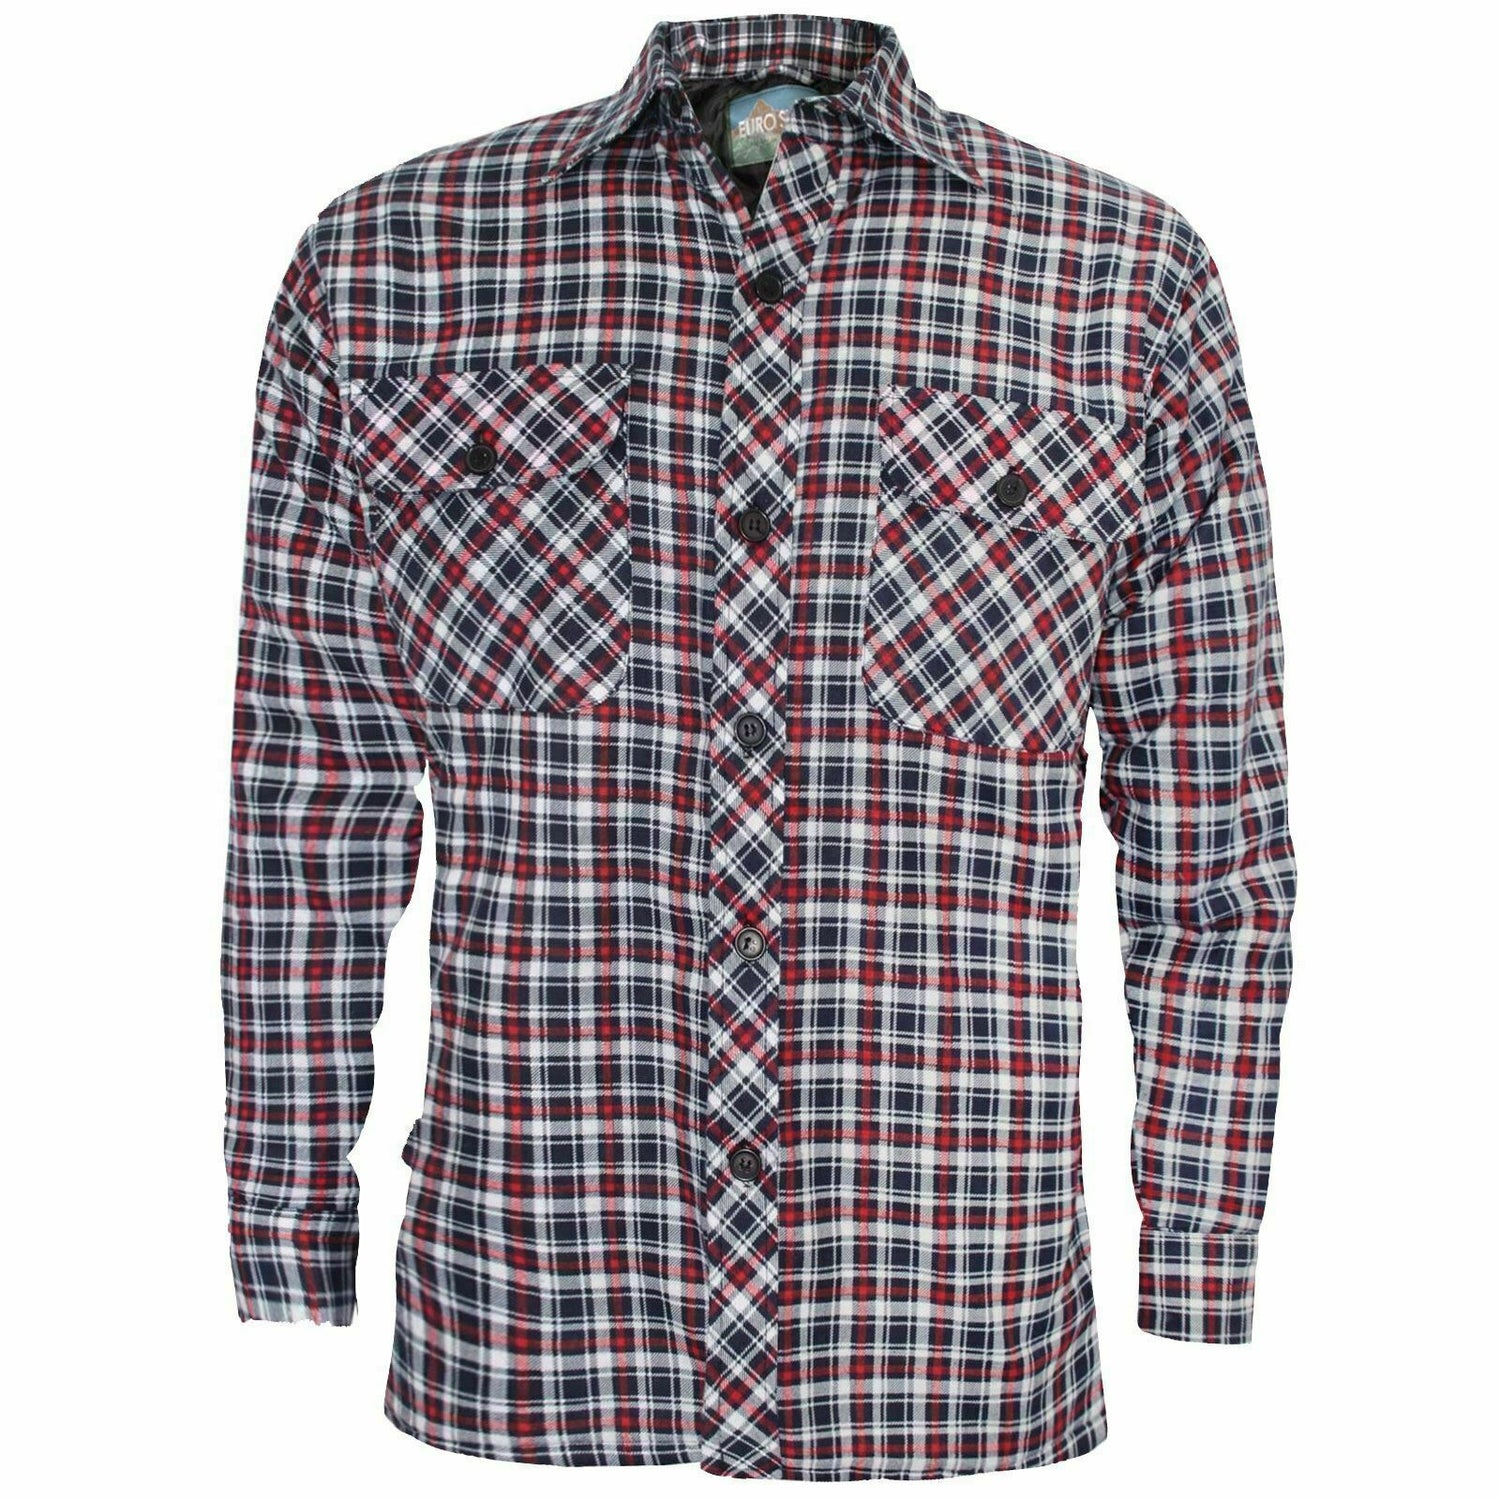 Men's Lumberjack Flannel Shirt In Small Red Check.